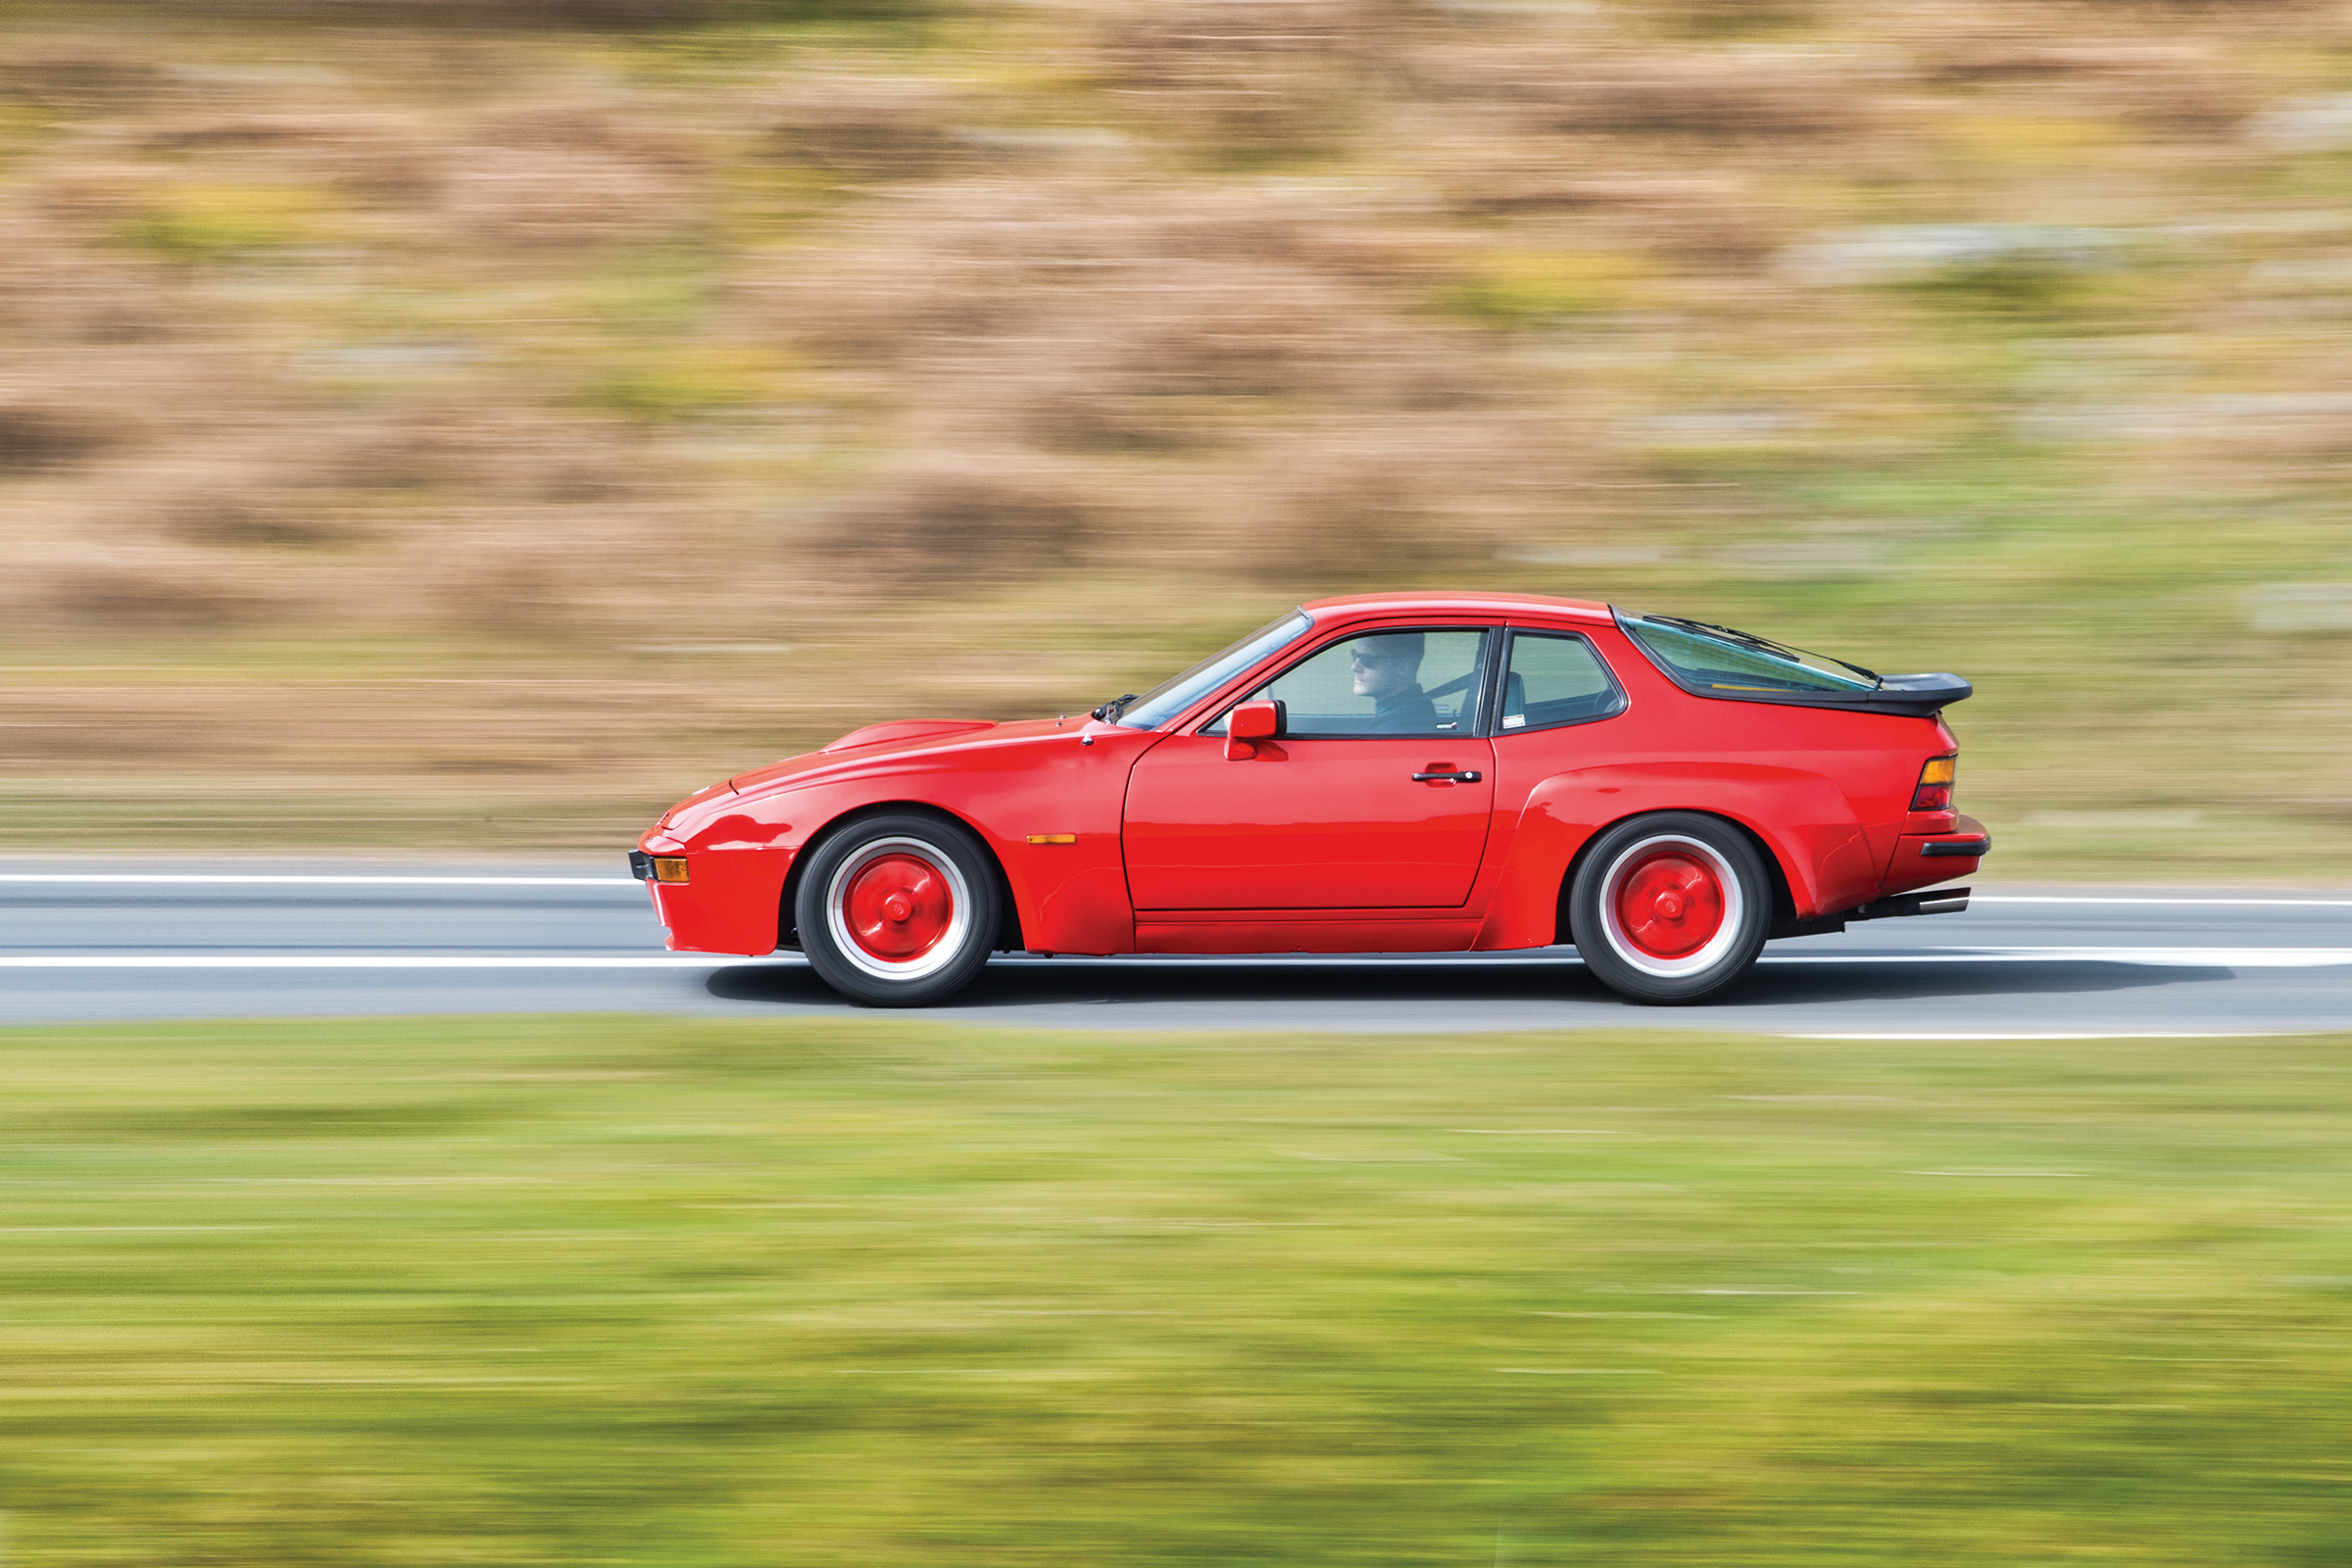 Porsche 924 Carrera GT: review, history and specs of an icon | evo